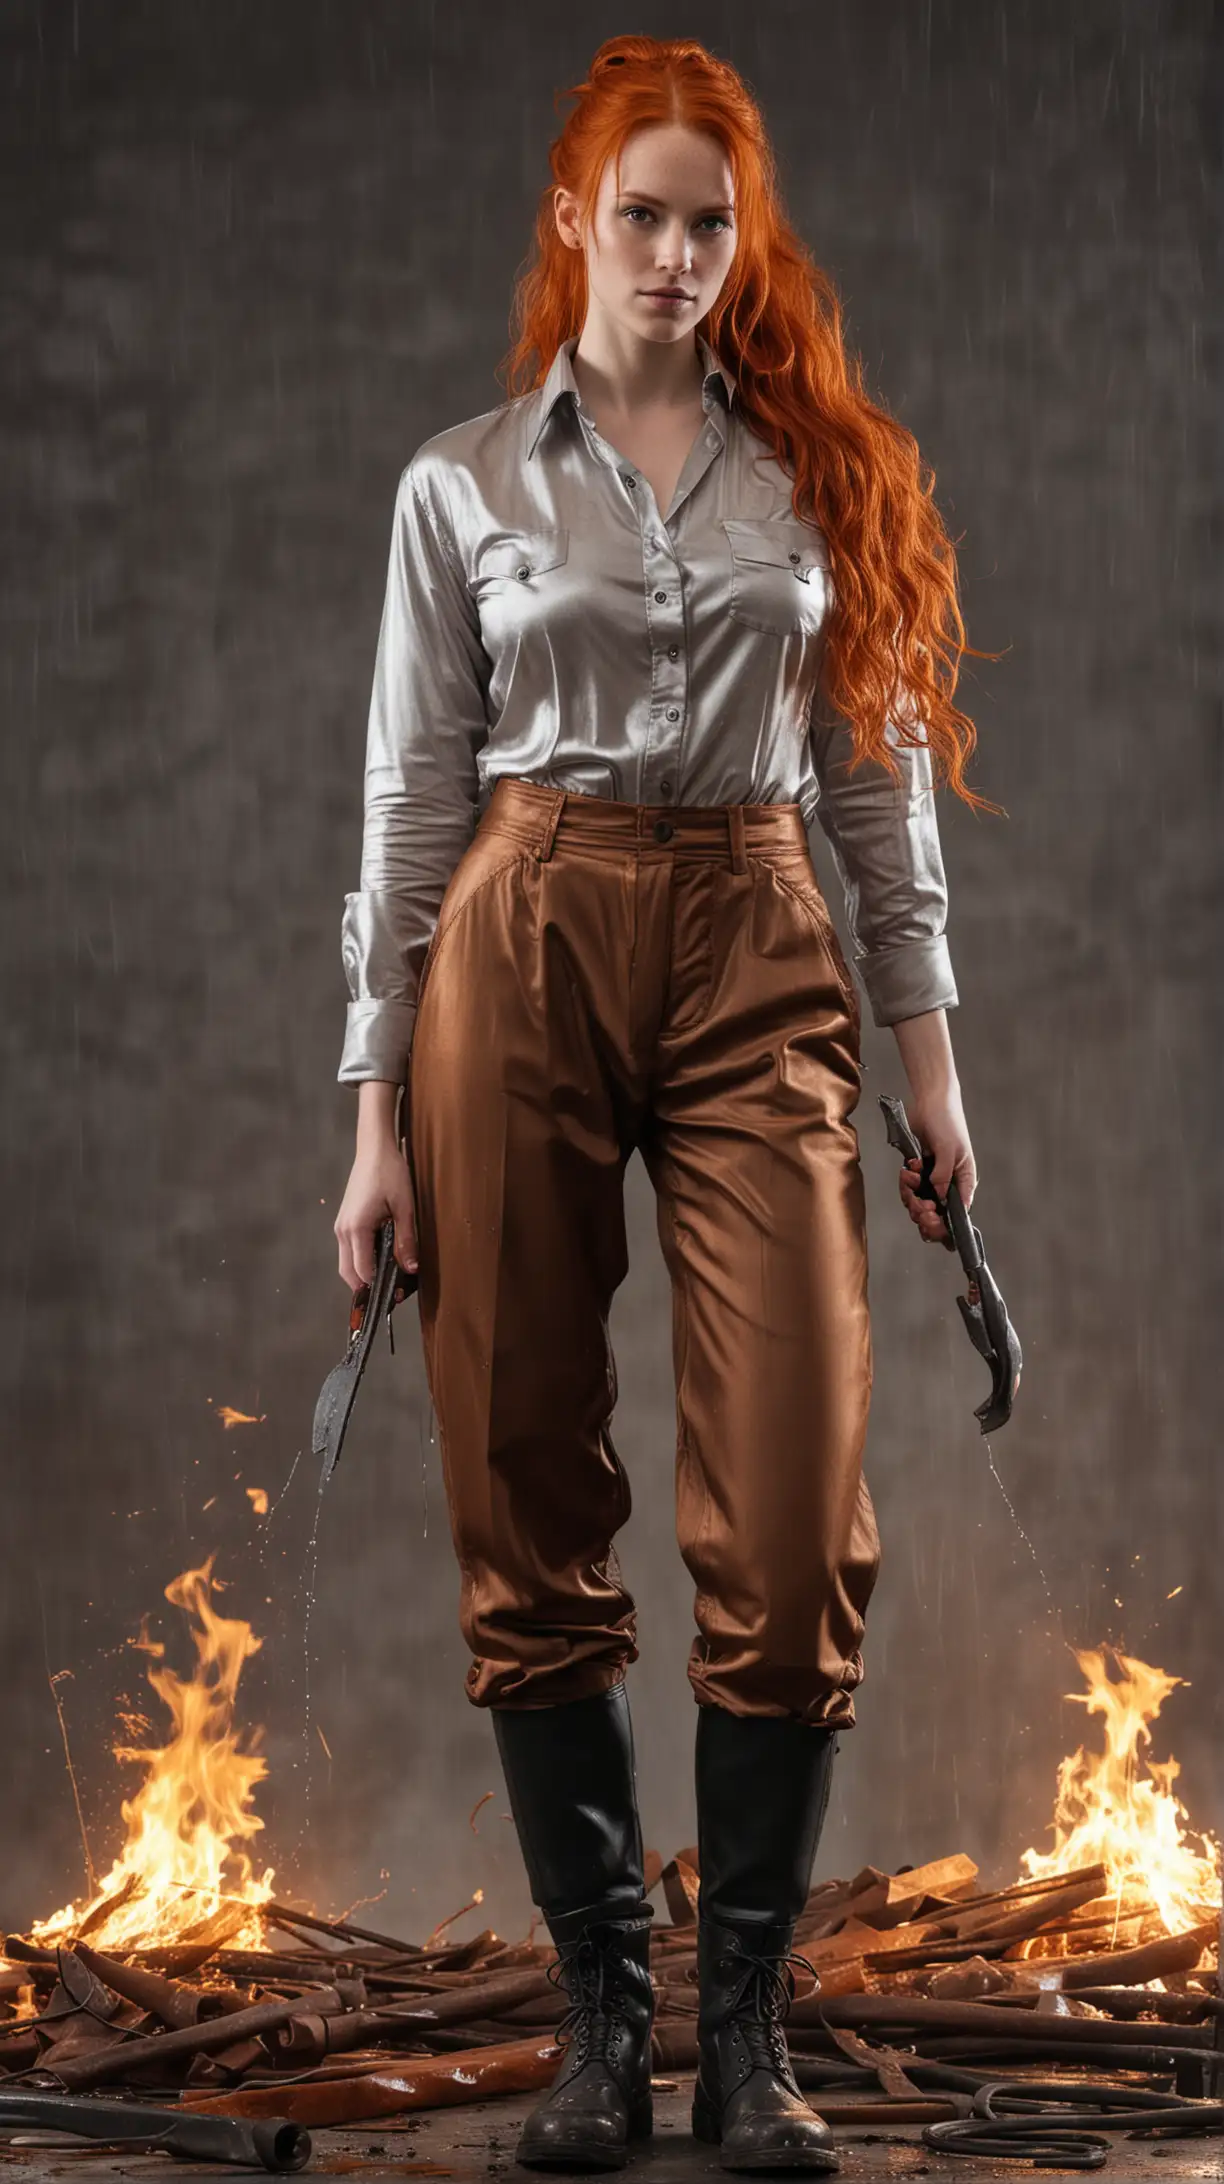 Professional Worker with Long Ponytail Hair in Rusty Metal Shirt